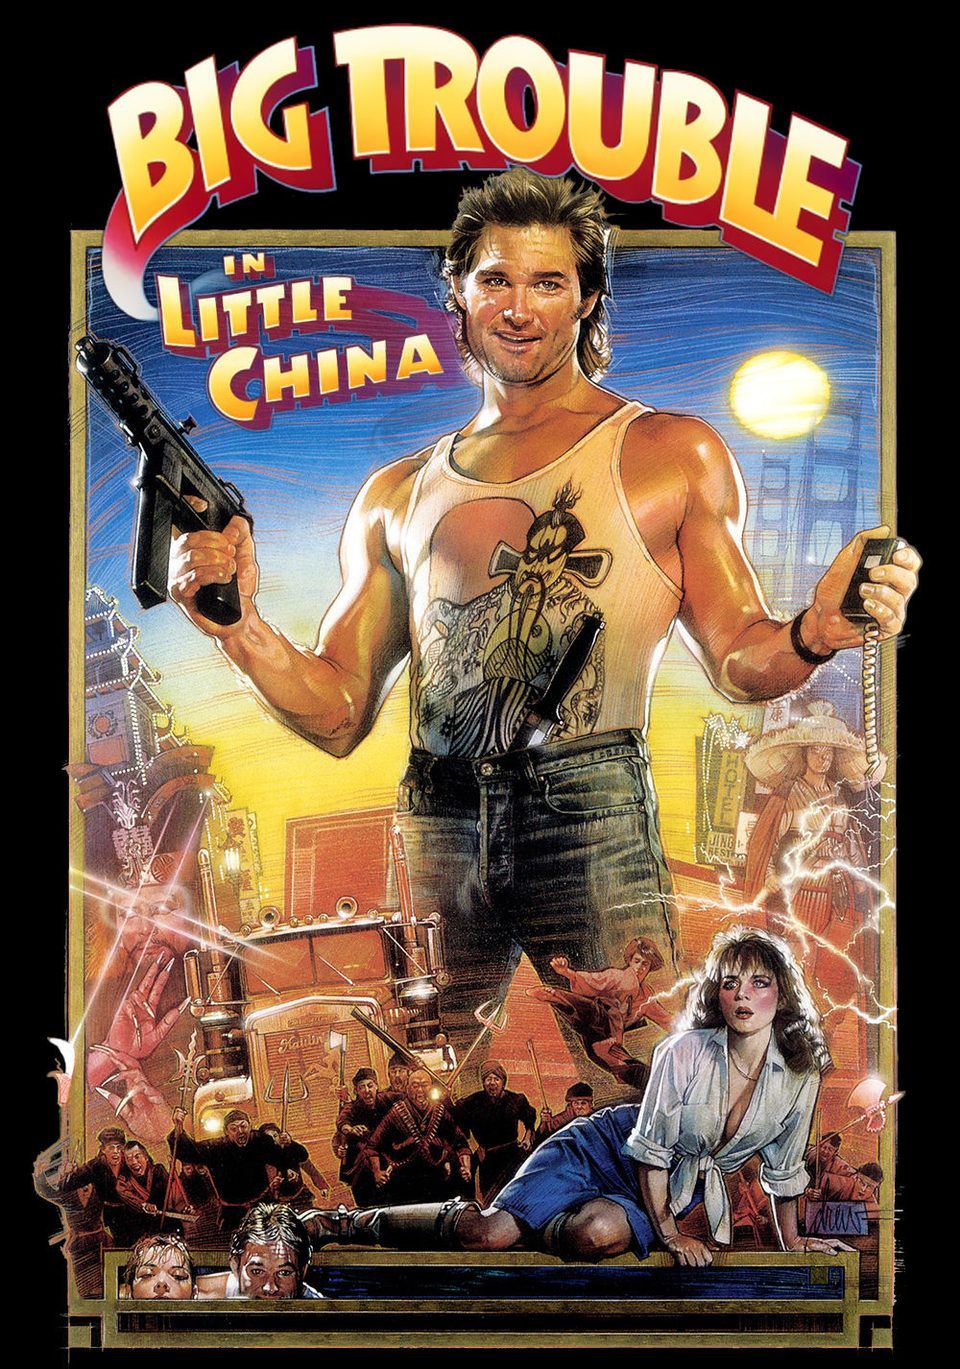 Poster of Big trouble in little China - Poster 'Big trouble in little China'